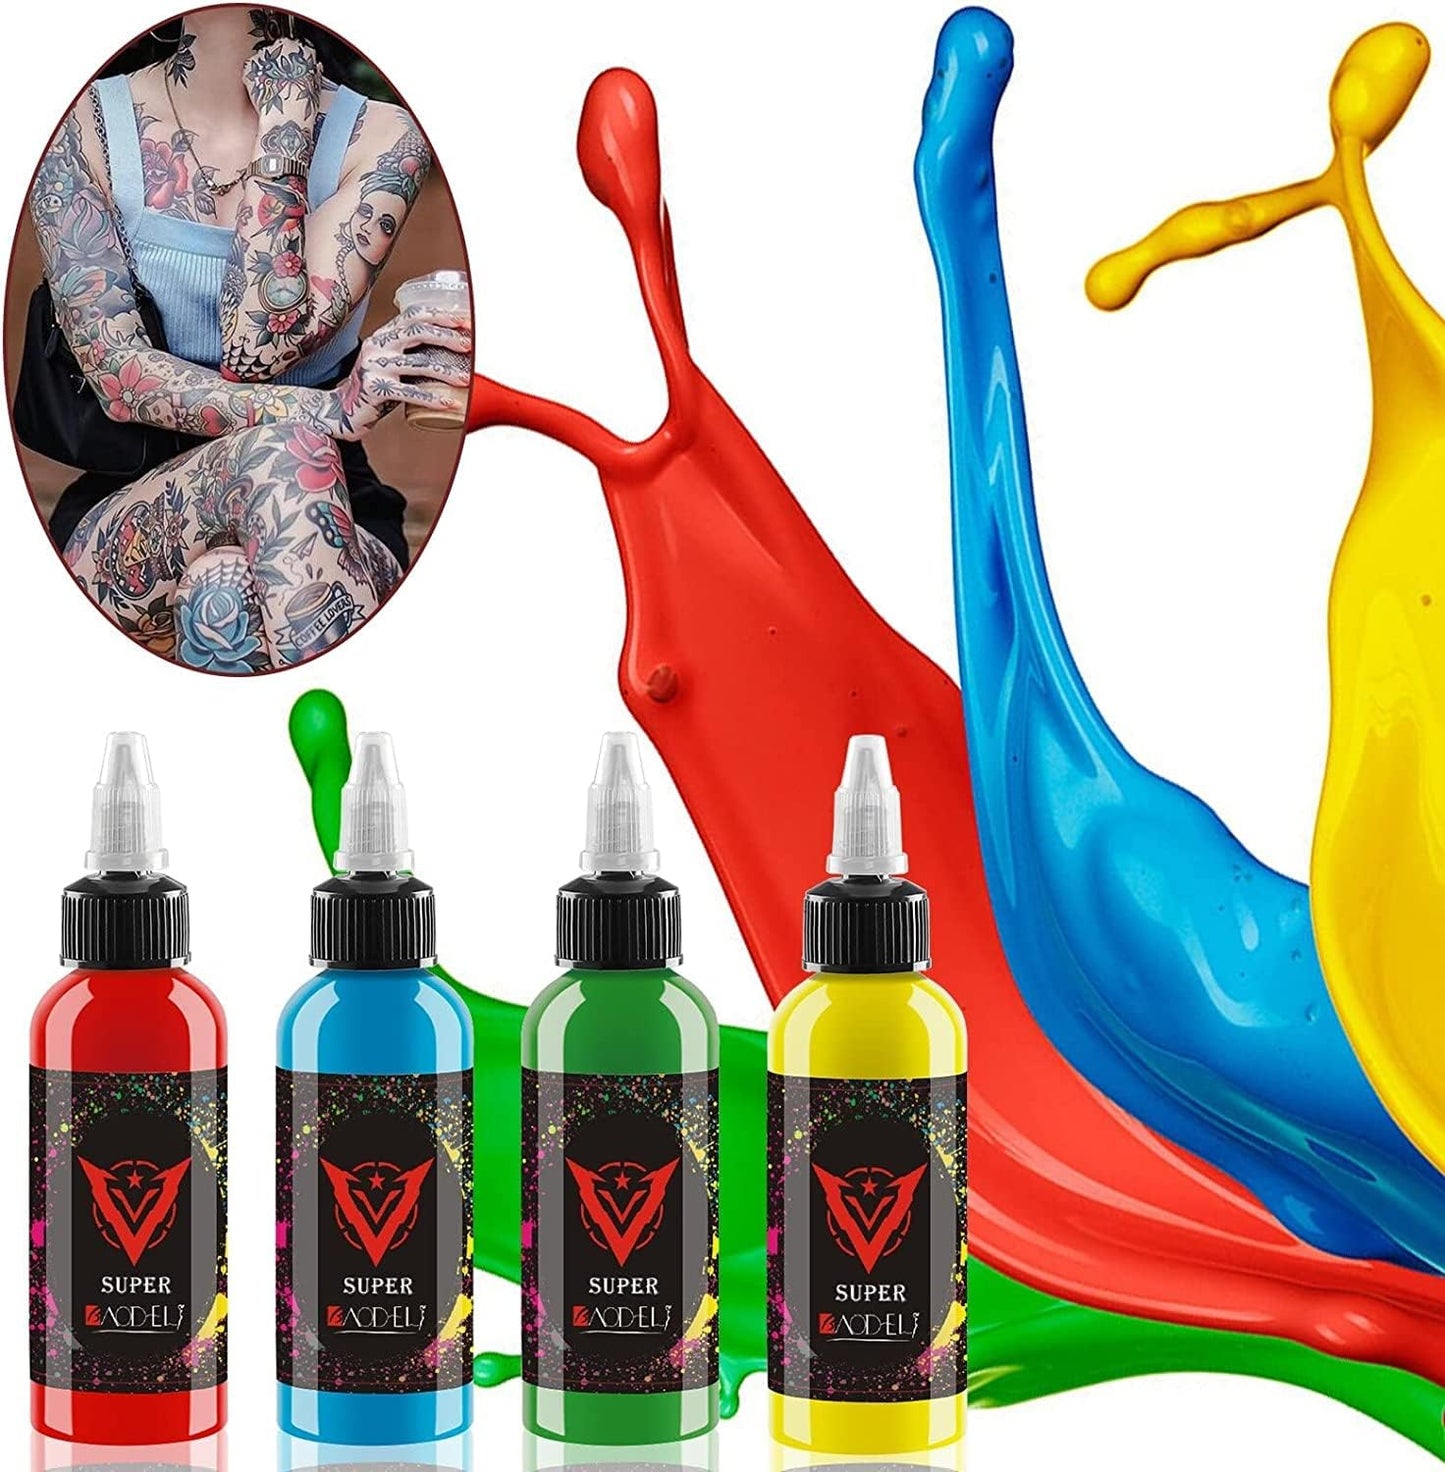 14 Colors Tattoo Ink Set 1 Ounce Bottles Permanent Professional Microblading Makeup Pigment Body Paint Tattoo Colour Kit (1OZ/30ML Bottle)